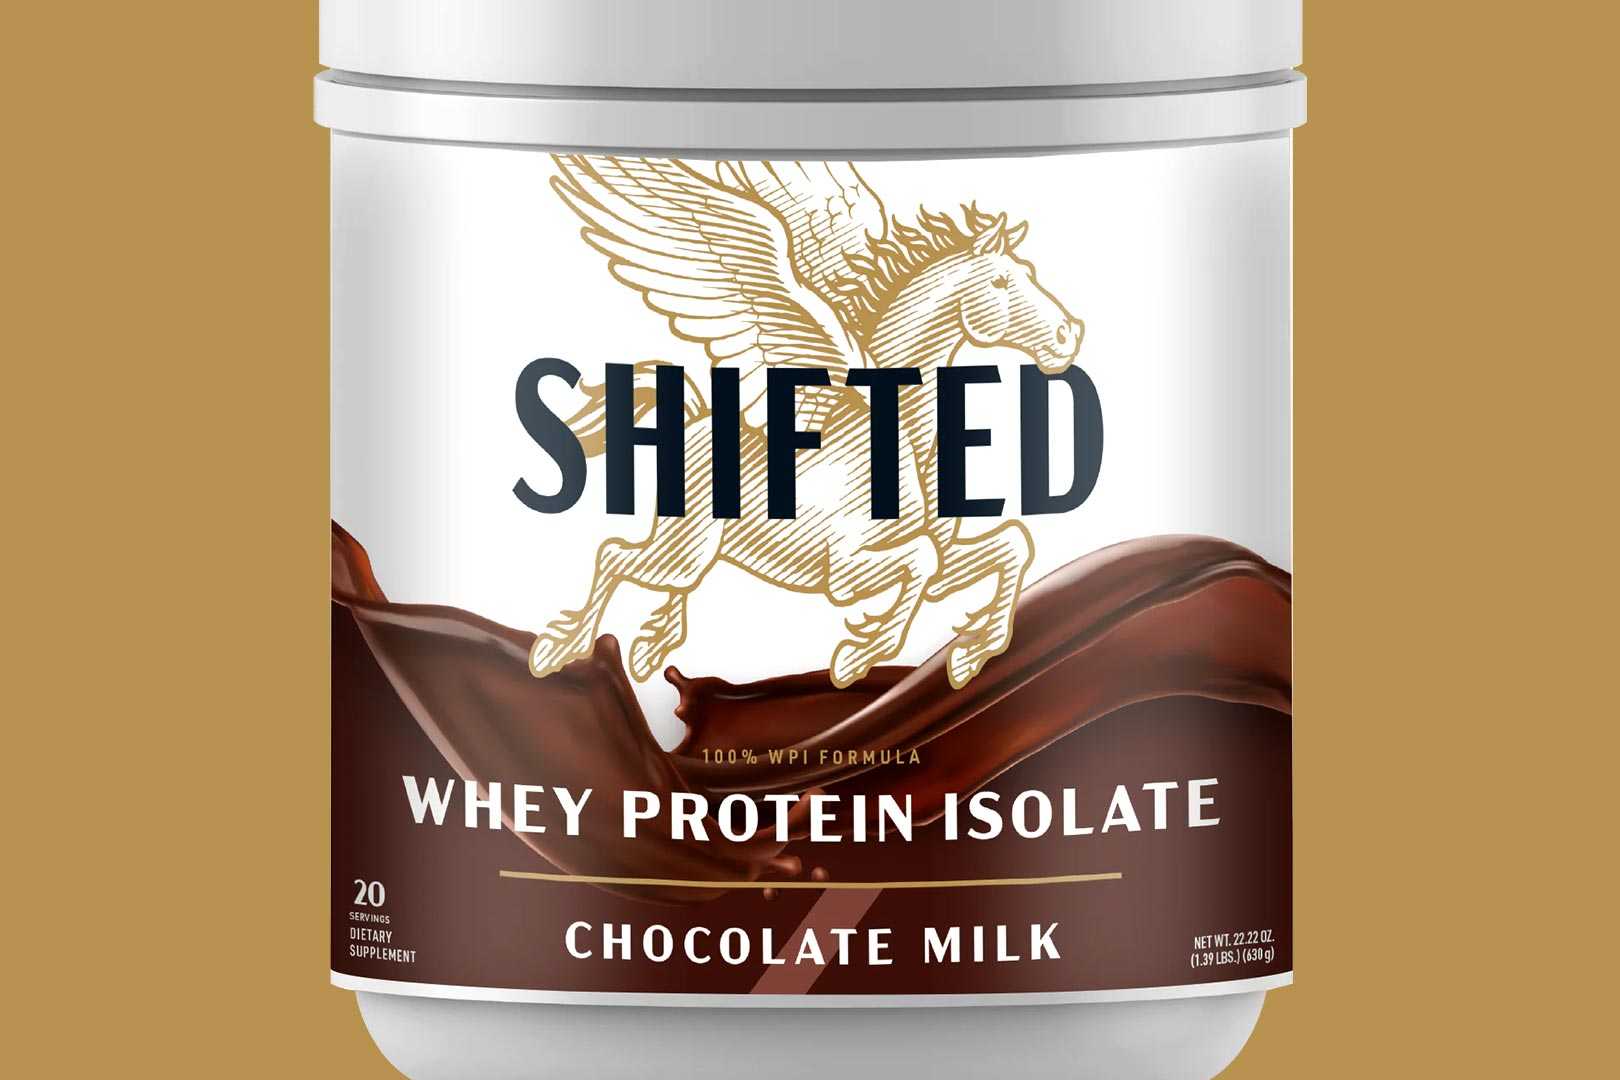 Shifted Whey Protein Isolate